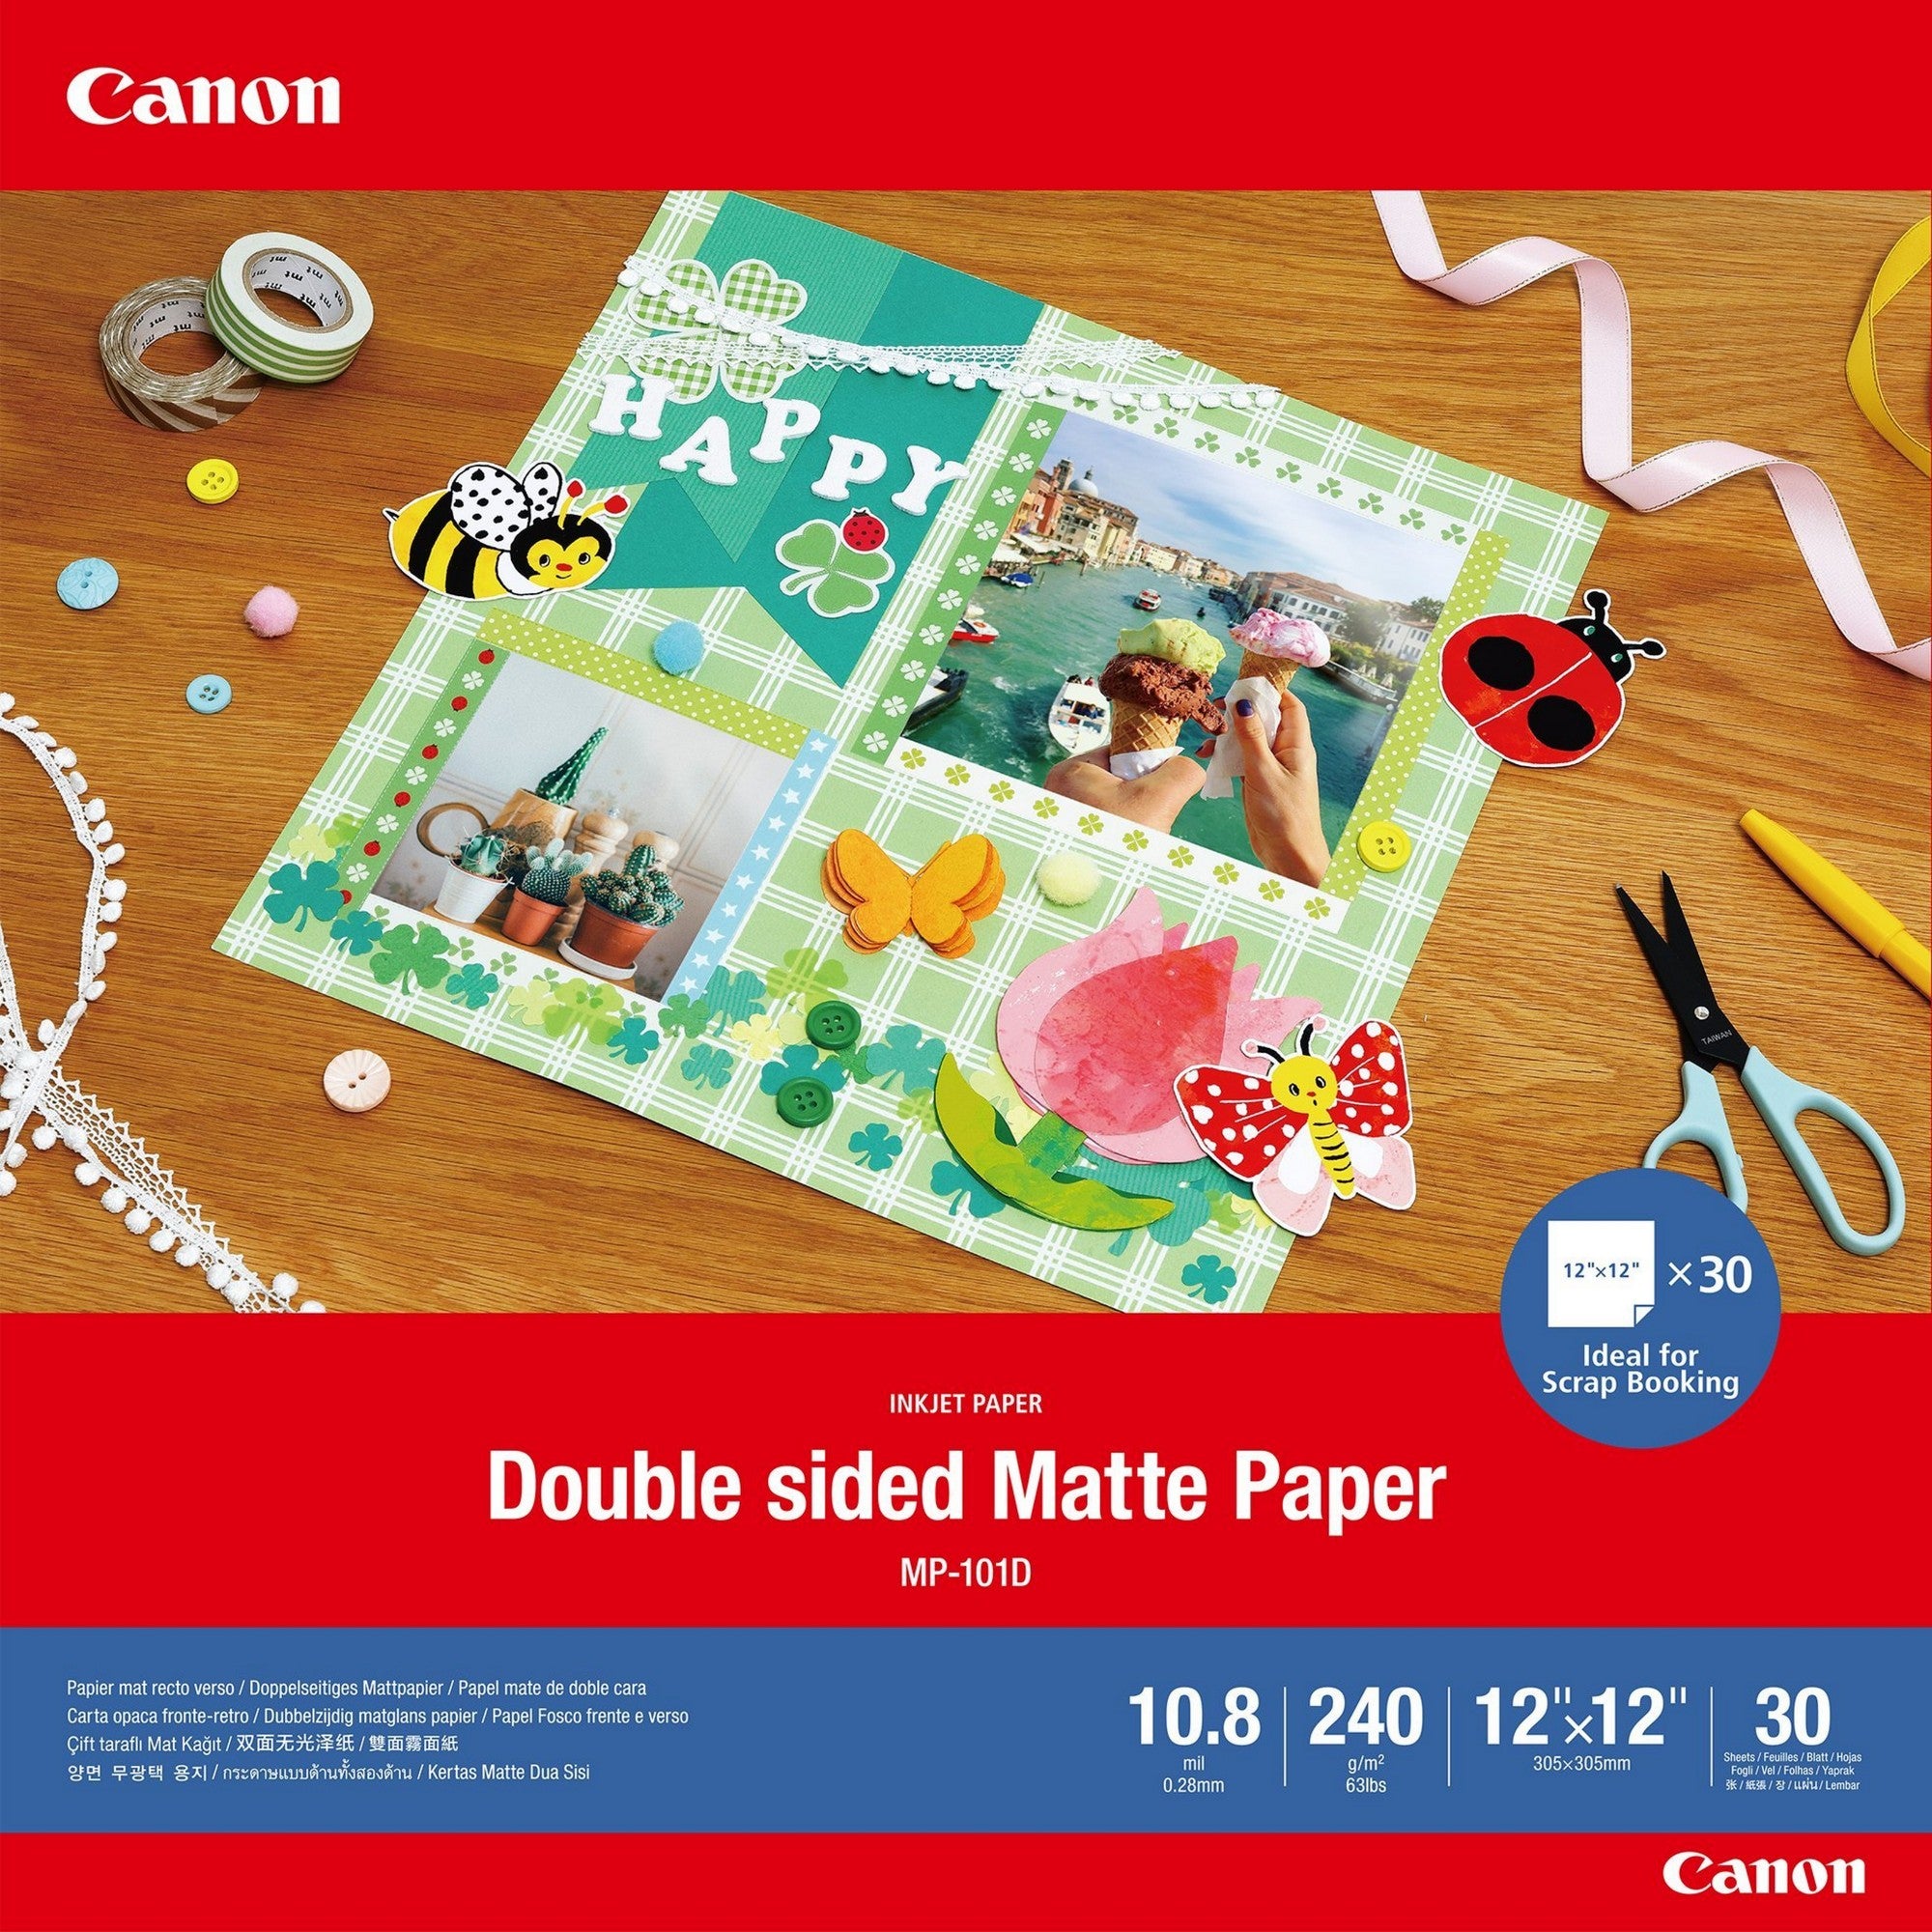 MP-101D Double-sided Matte Paper